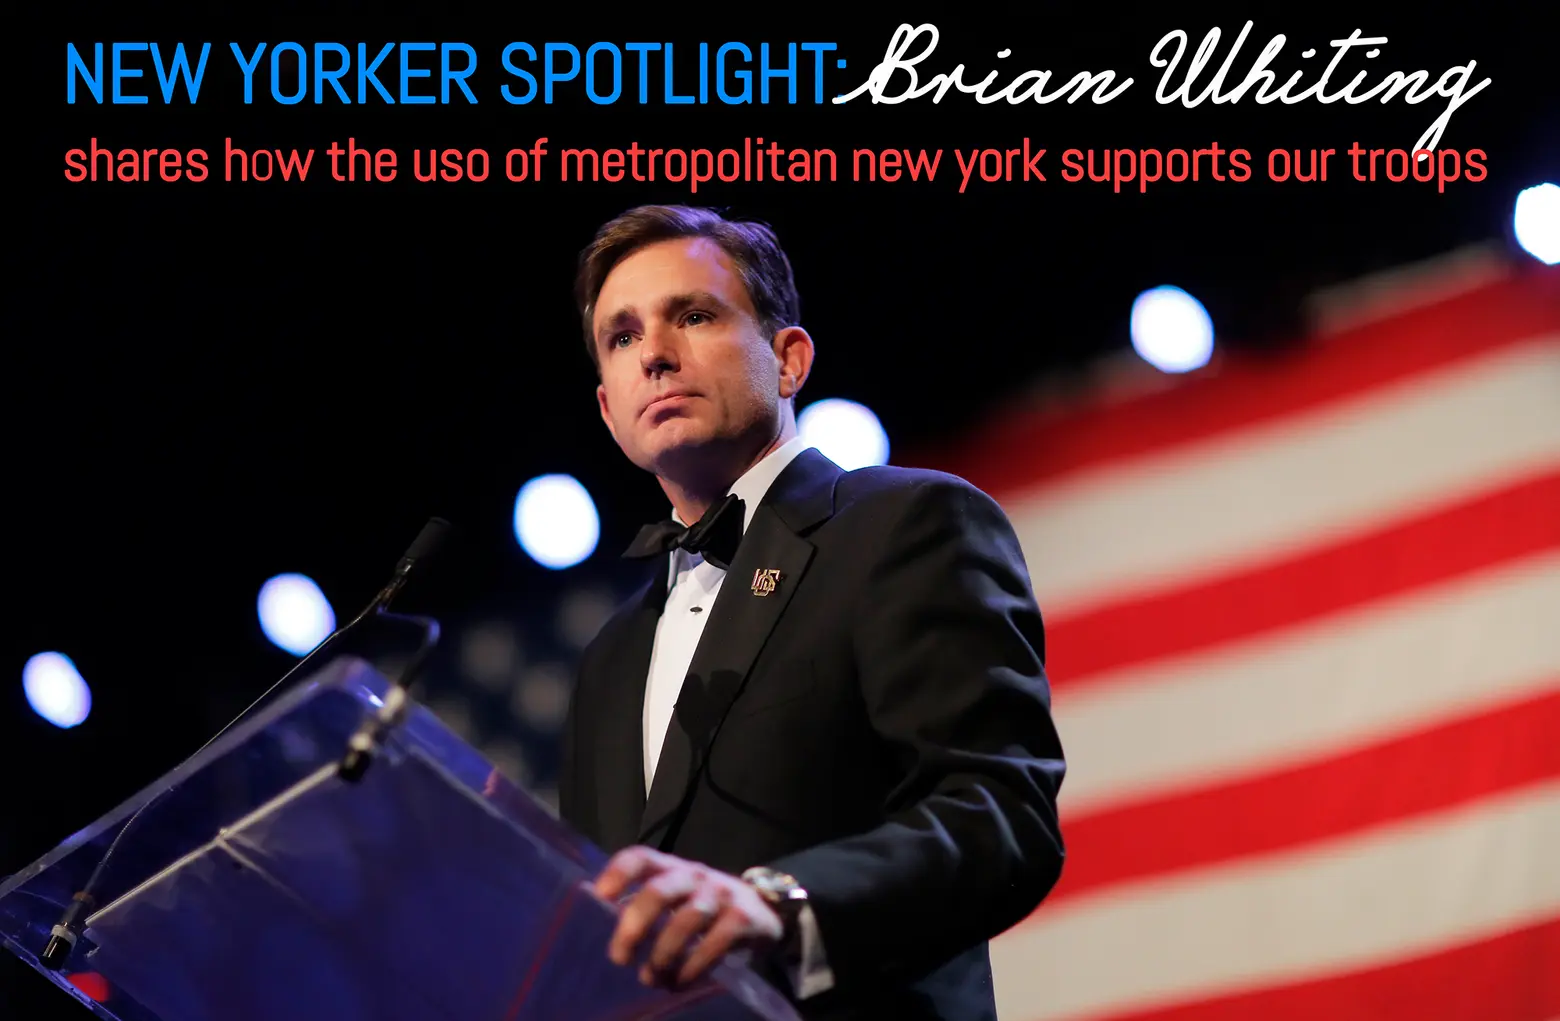 Spotlight: Brian Whiting Shares How the USO of Metropolitan New York Supports Our Troops